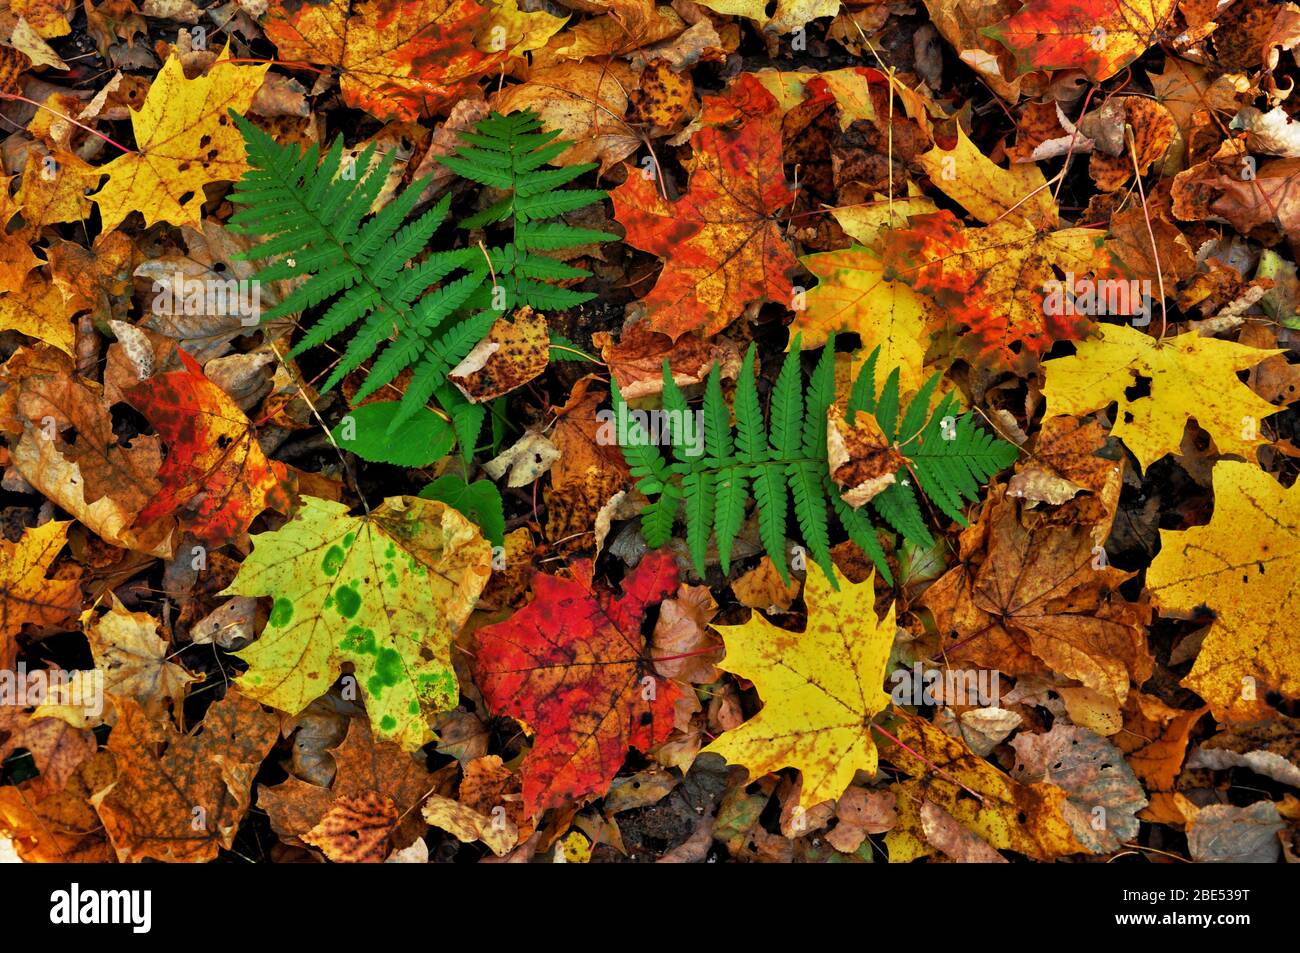 Colorful fallen red orange yellow autumn maple leaves. The green Bush of fern. Close up. Stock Photo